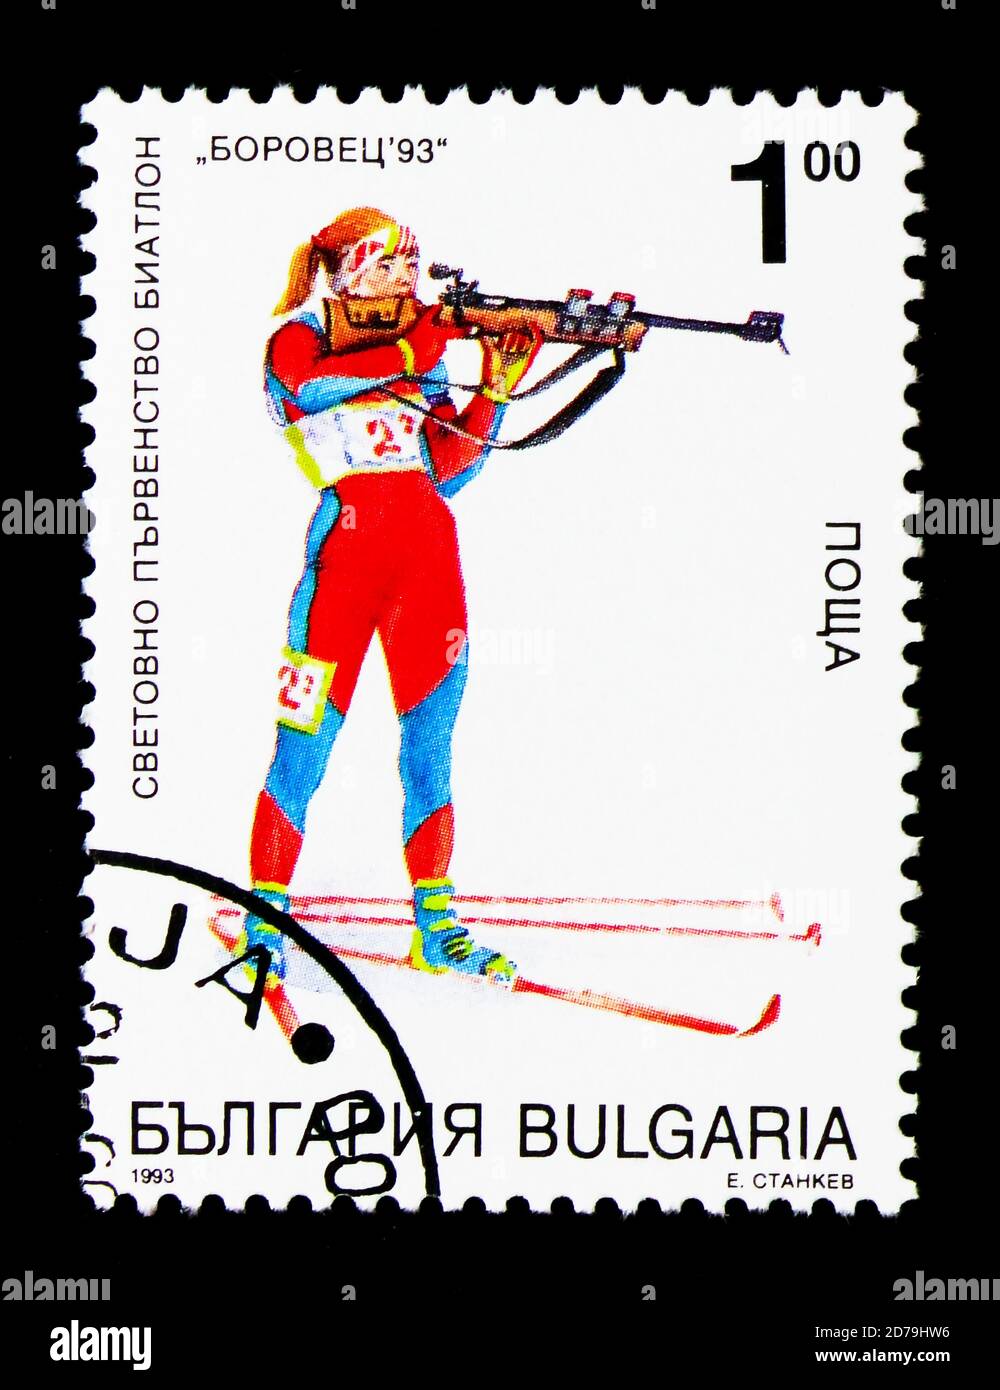 MOSCOW, RUSSIA - DECEMBER 21, 2017: A stamp printed in Bulgaria shows World Biathlon Championship, Bulgaria 1993, Sport serie, circa 1993 Stock Photo